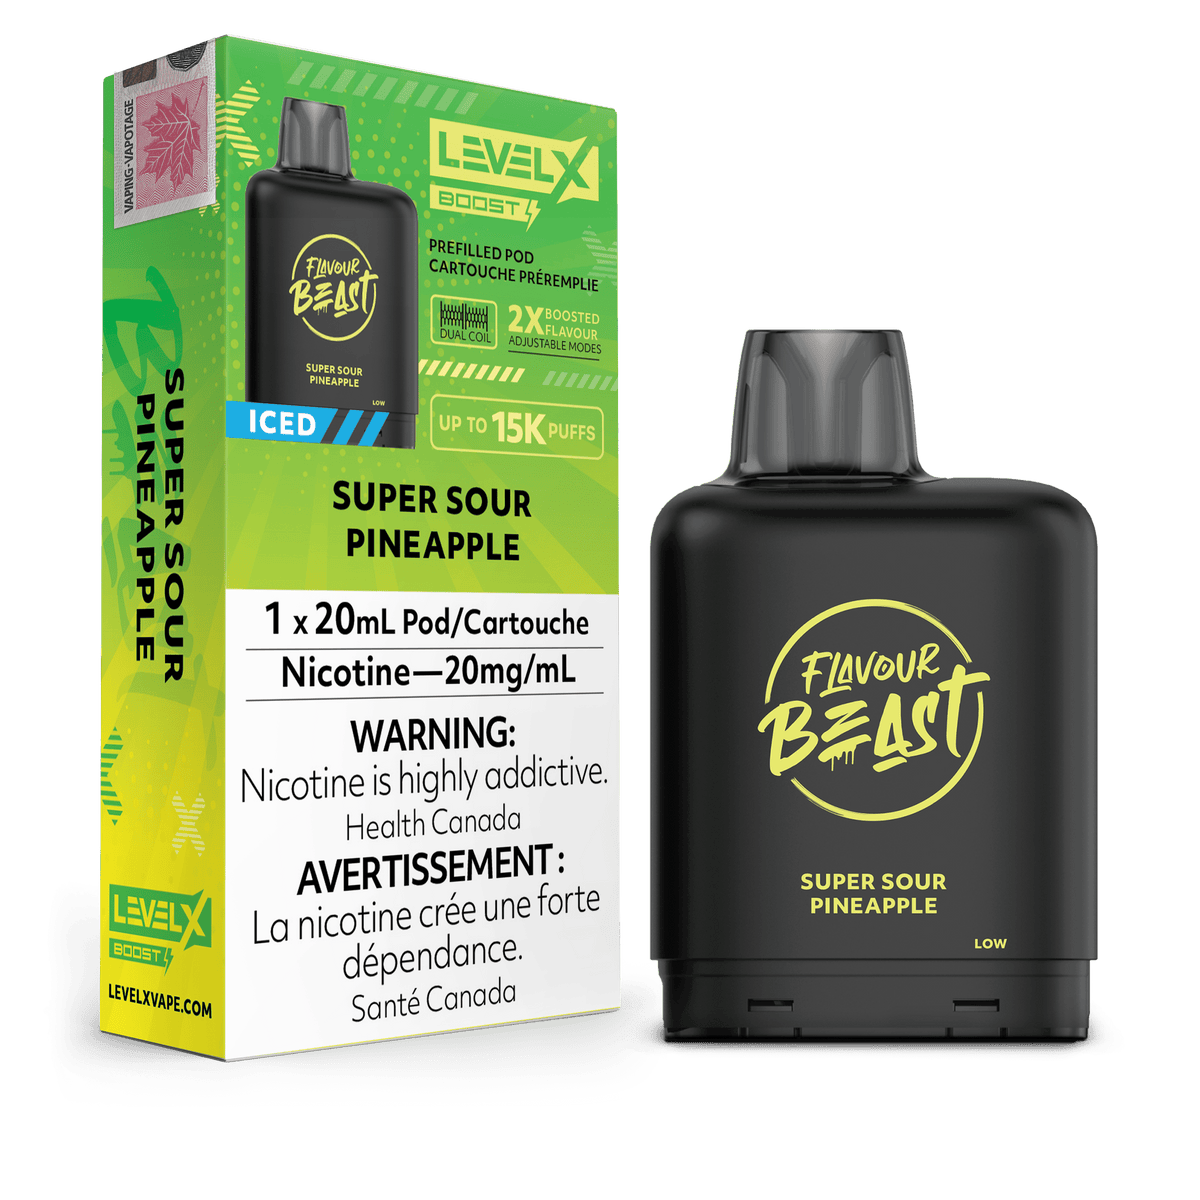 Level X Flavour Beast Boost Pod - Super Sour Pineapple Iced available on Canada online vape shop